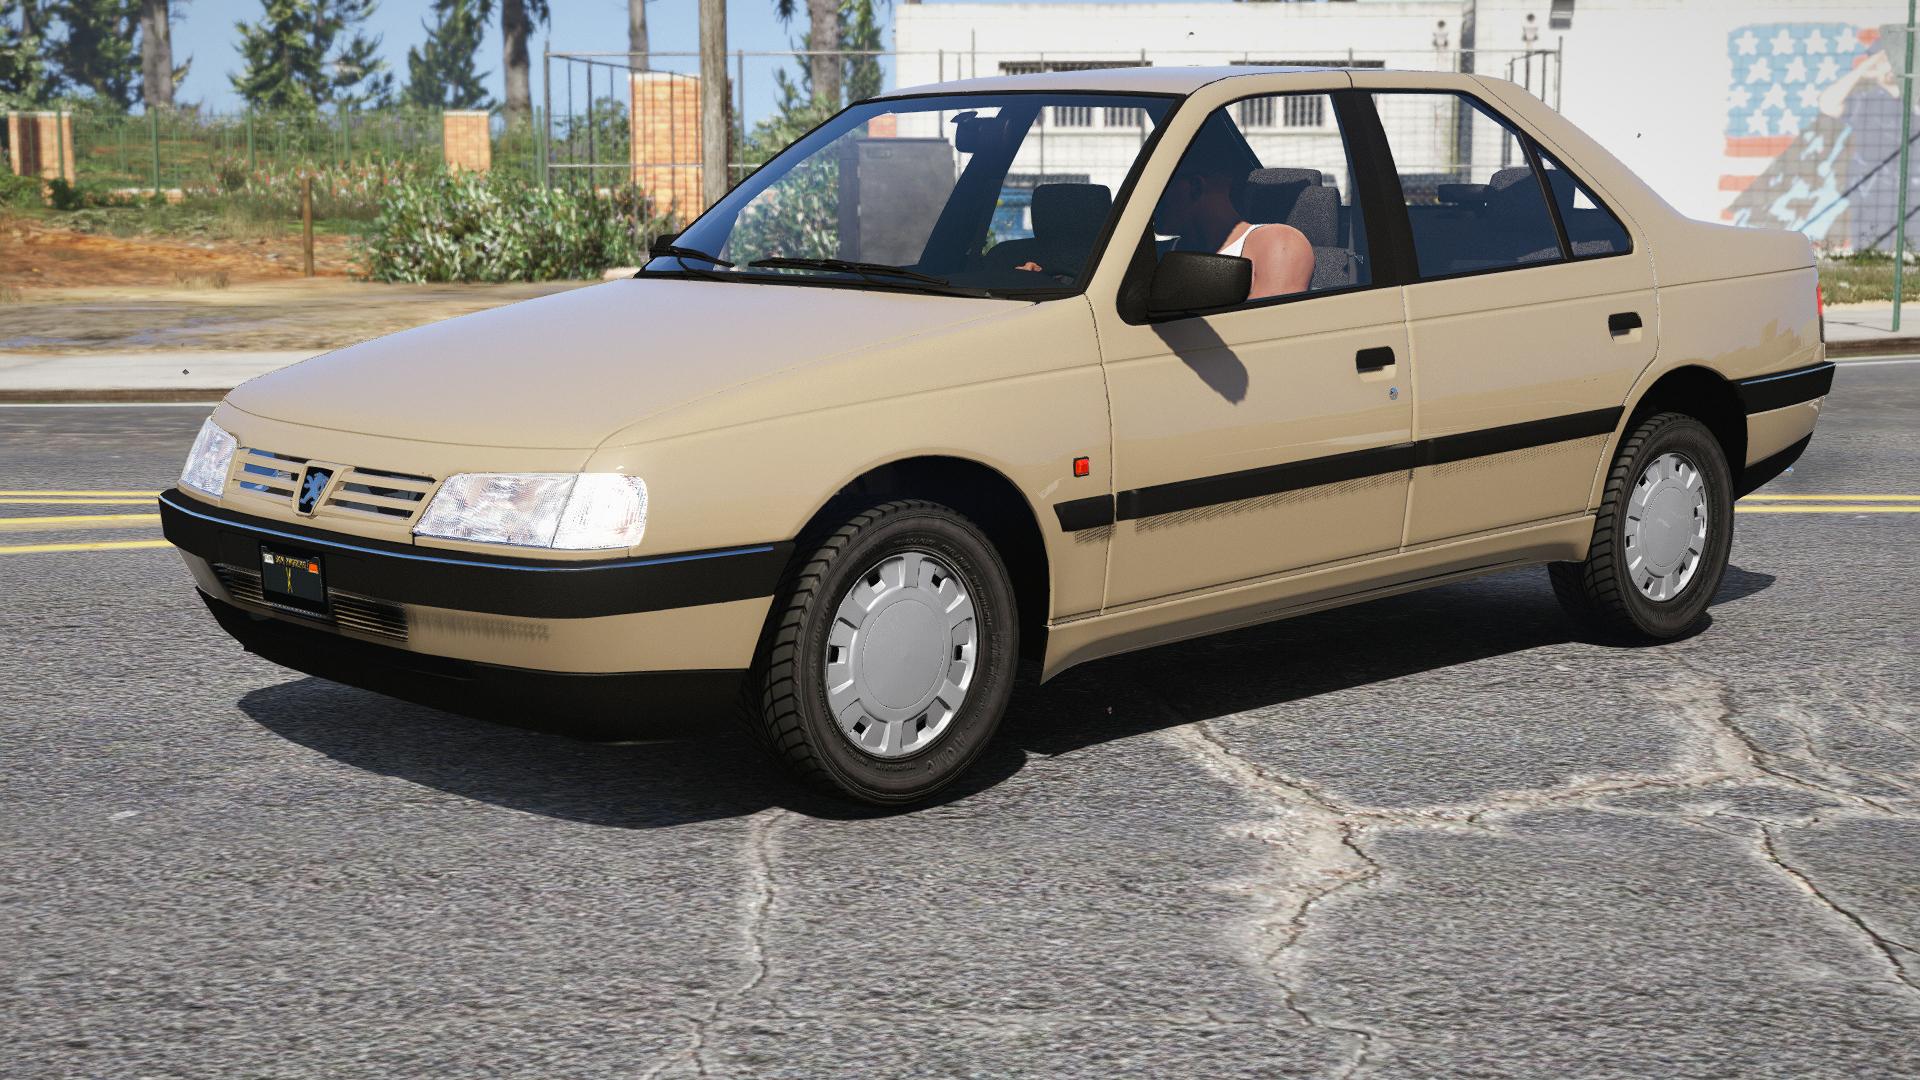 Peugeot 405 1995  Enthusiast wanted  Techzle